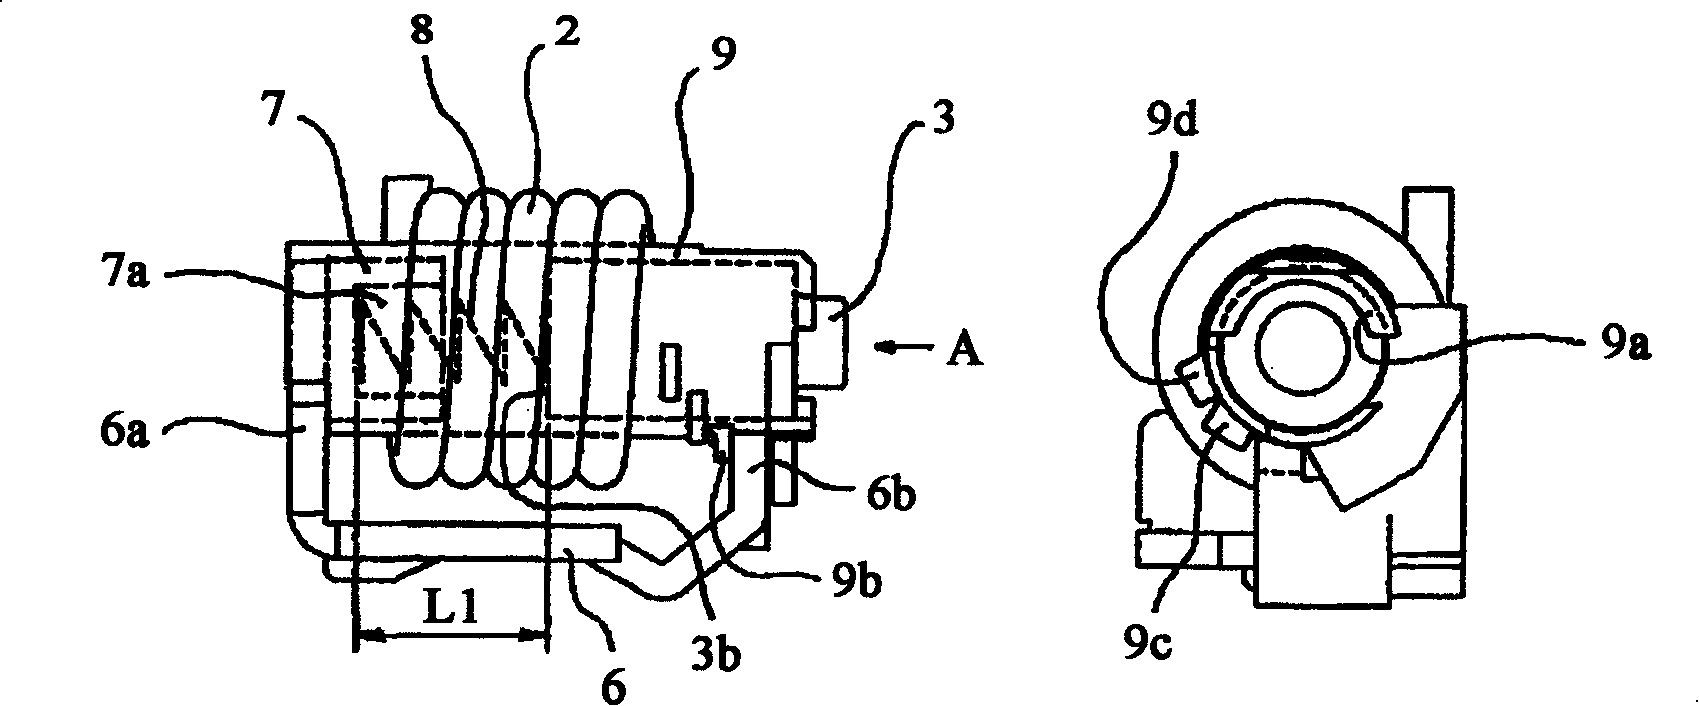 Electrical circuit breaker electromagnetical tripping apparatus